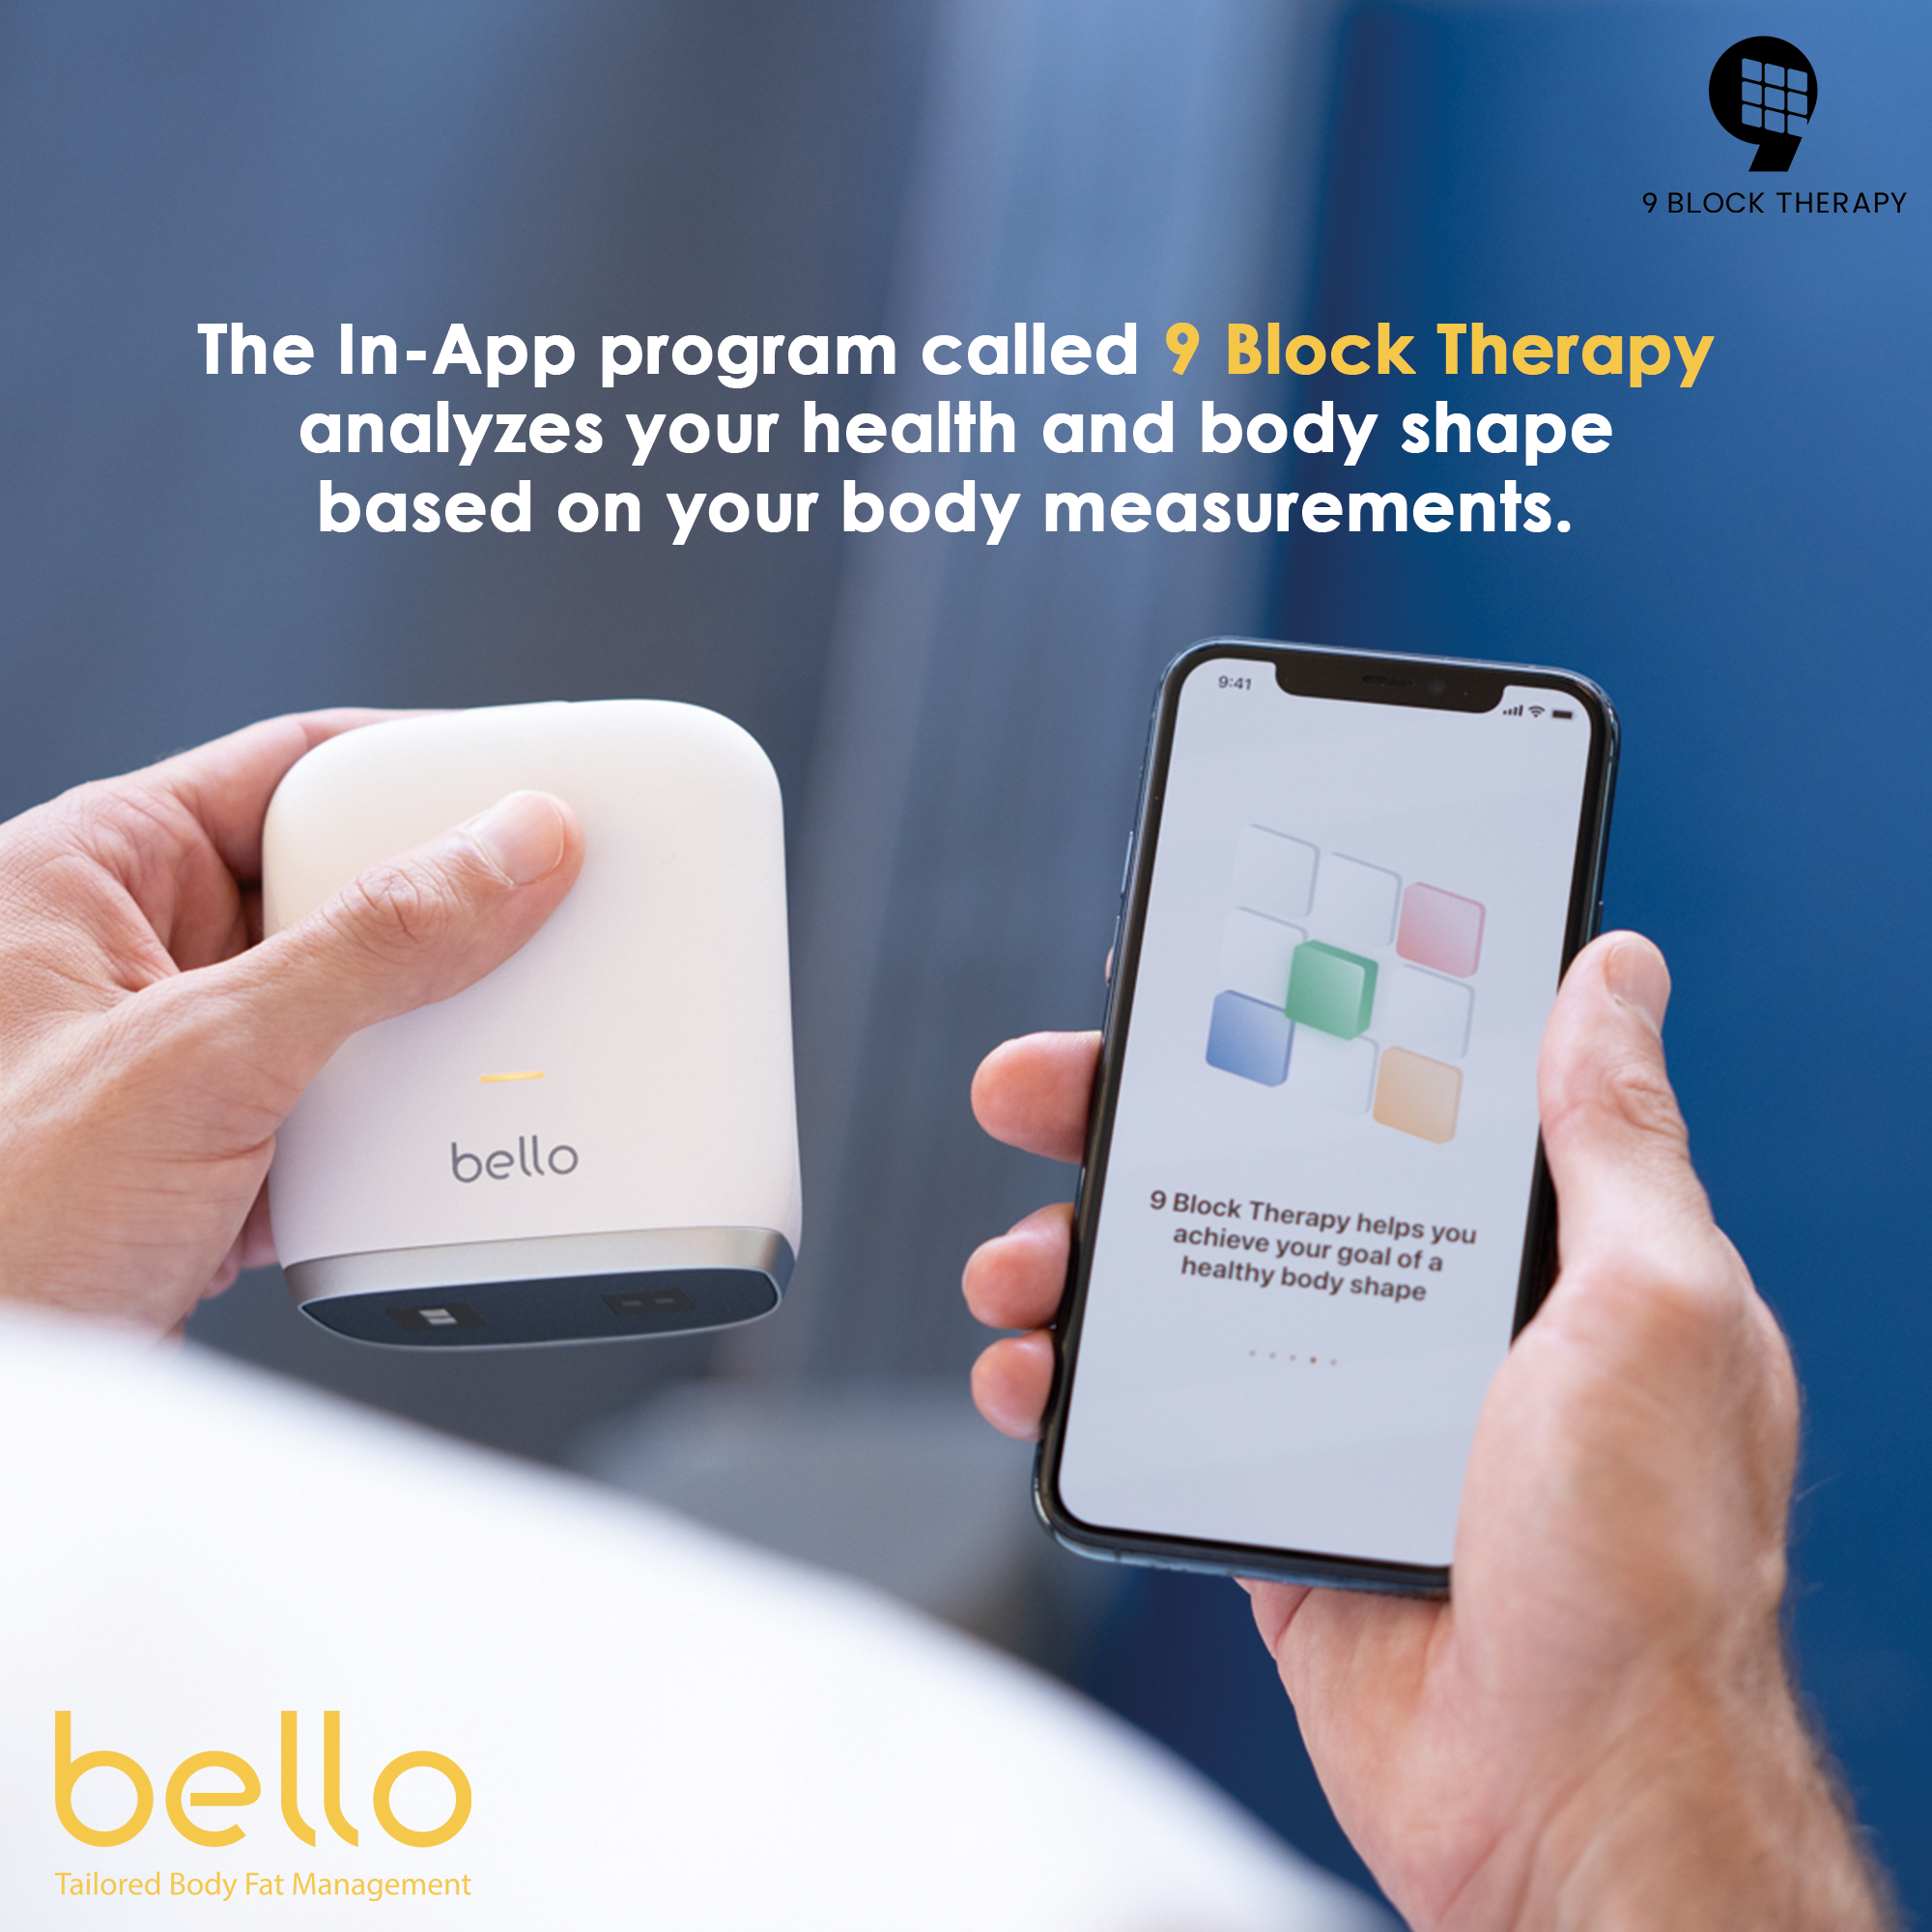 Bello 2 - Tailored Body Fat Management